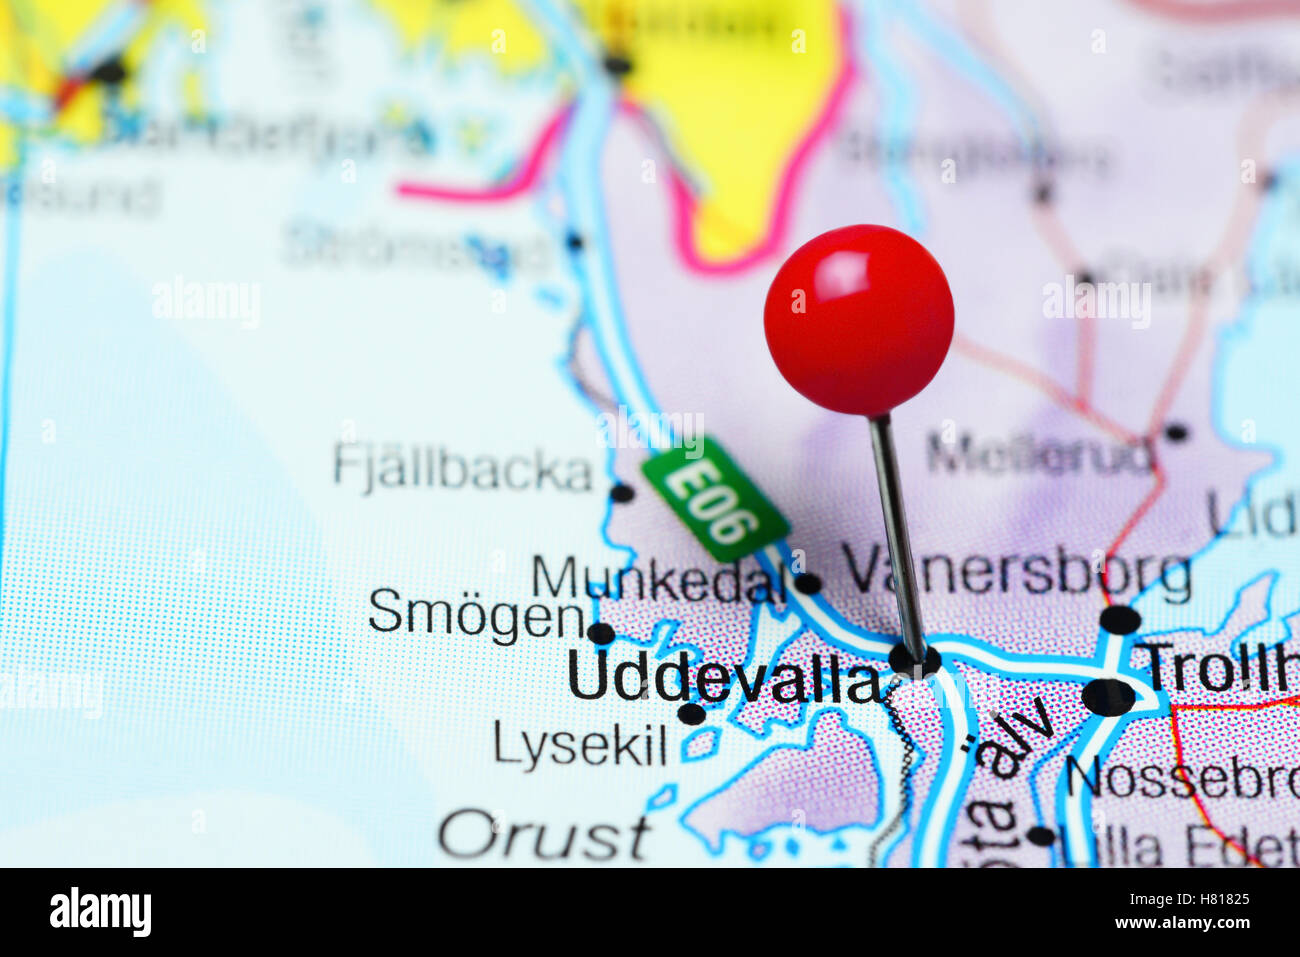 Uddevalla pinned on a map of Sweden Stock Photo